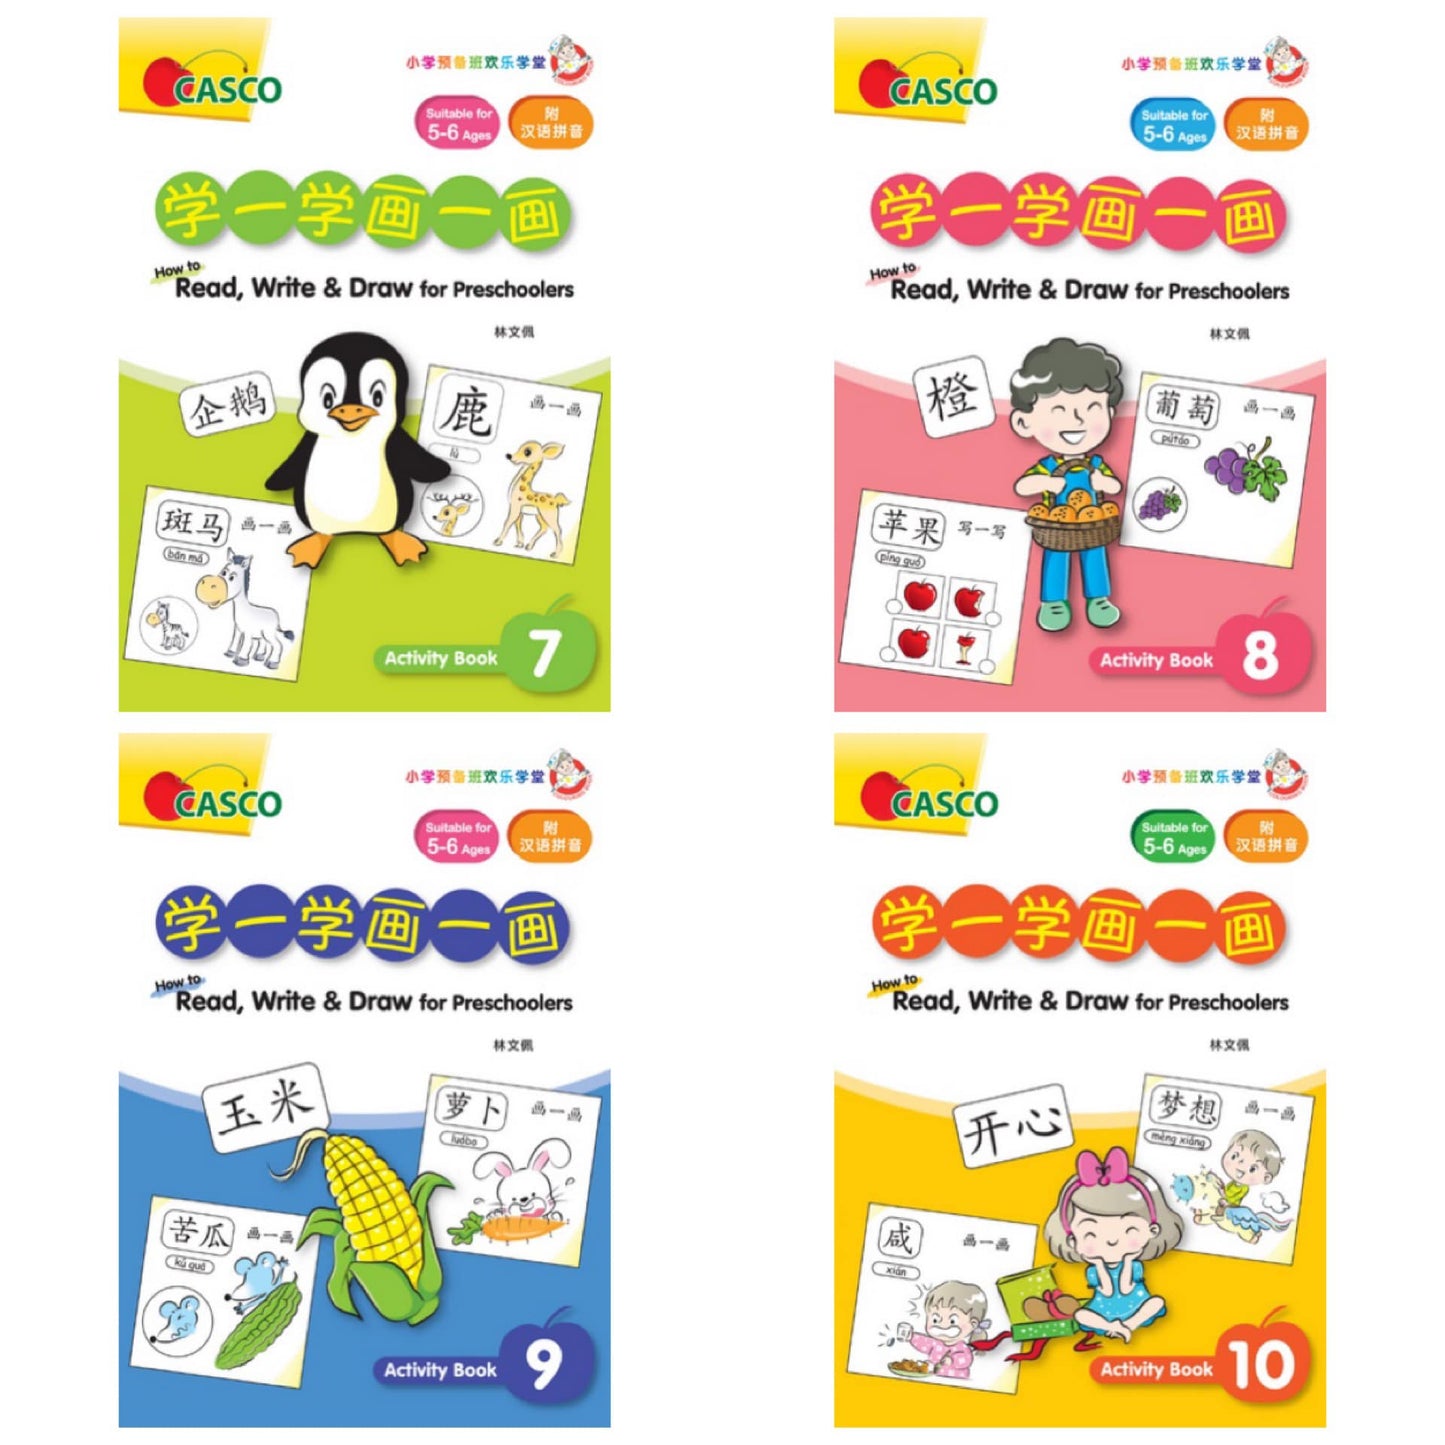 How To Read, Write & Draw For Preschoolers Activity Book 1 to 10